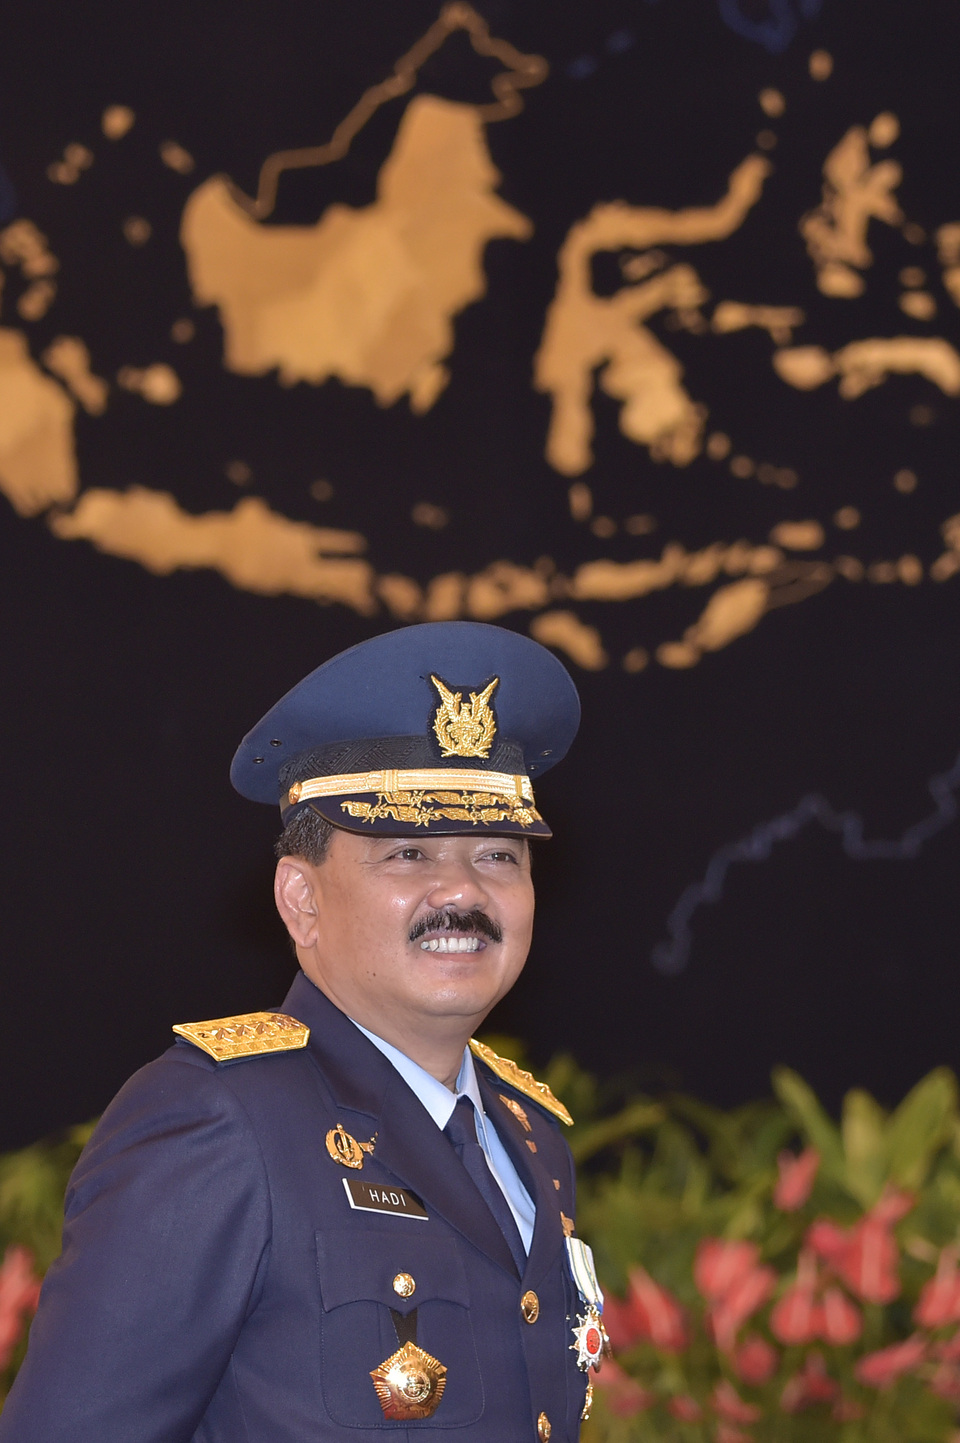 Charles Honoris, a member of the House of Representatives Commission I, which oversees defense, information, foreign and political affairs, has expressed a desire for newly appointed Air Chief Marshall Hadi Tjahjanto, pictured, to improve the Air Force's current weapon systems to heighten safety and defense capacity.(Antara Photo/Rosa Panggabean)